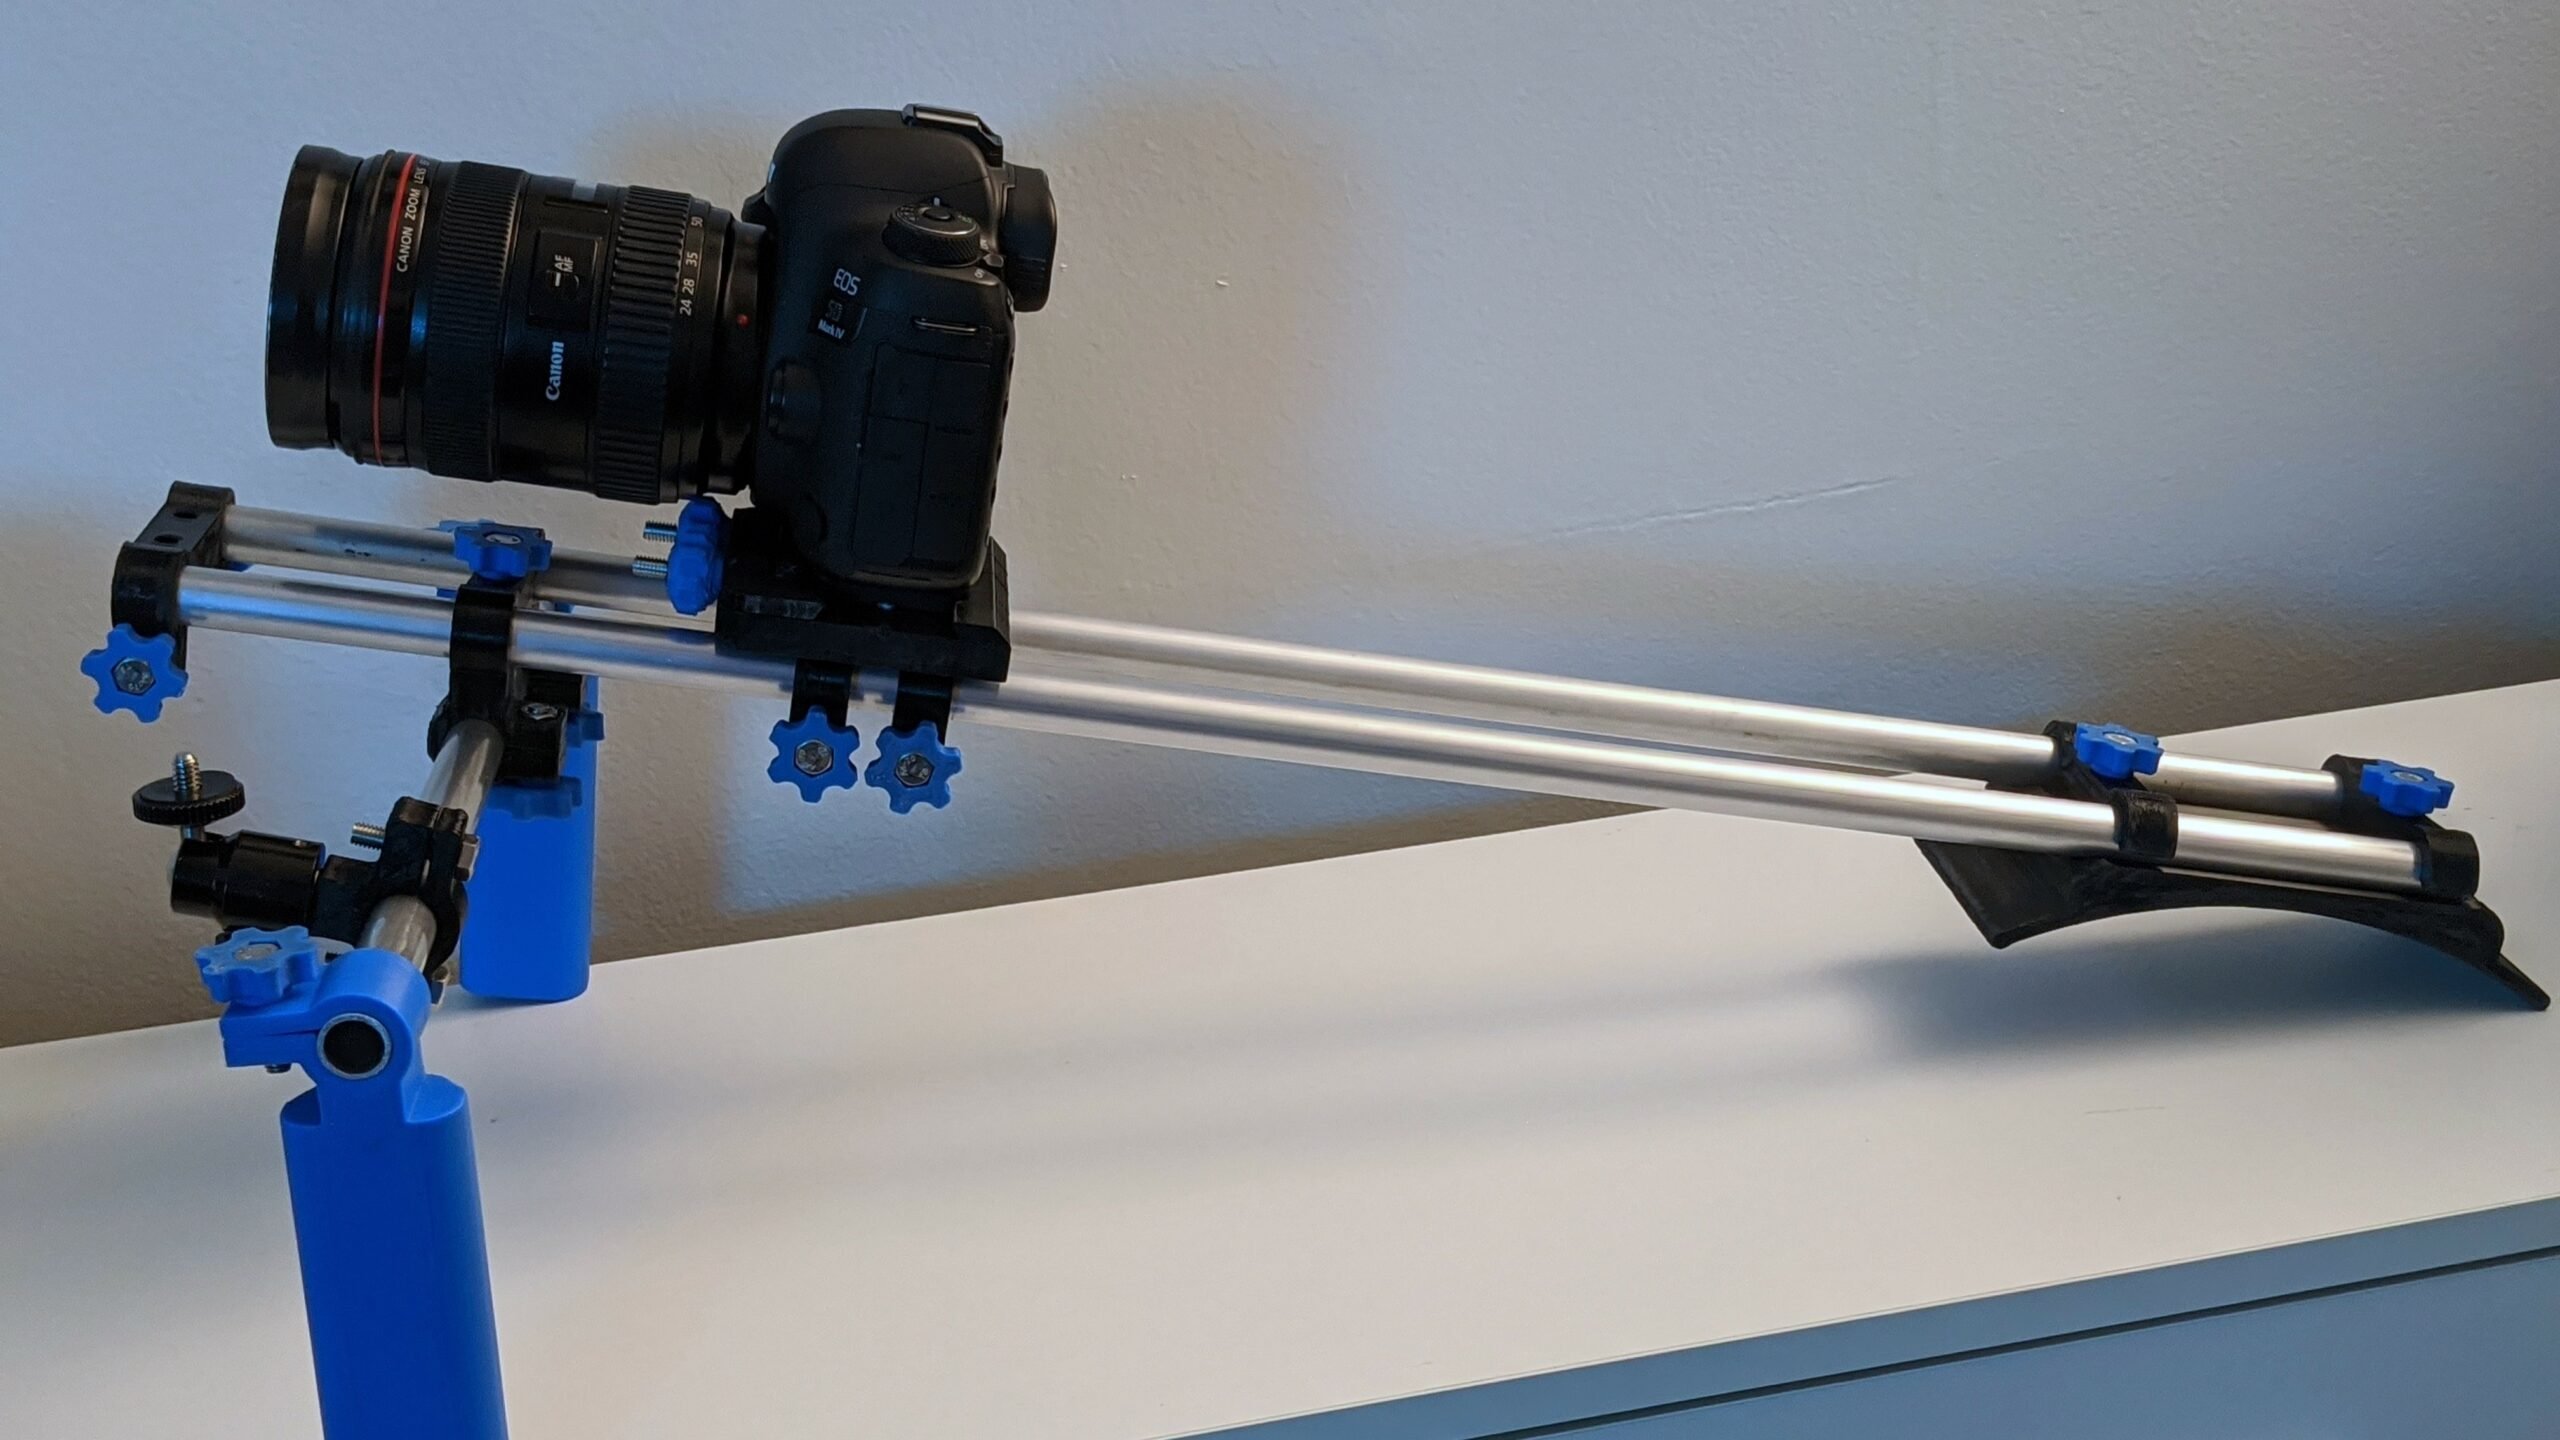 Filmmaking accessories you can 3D print